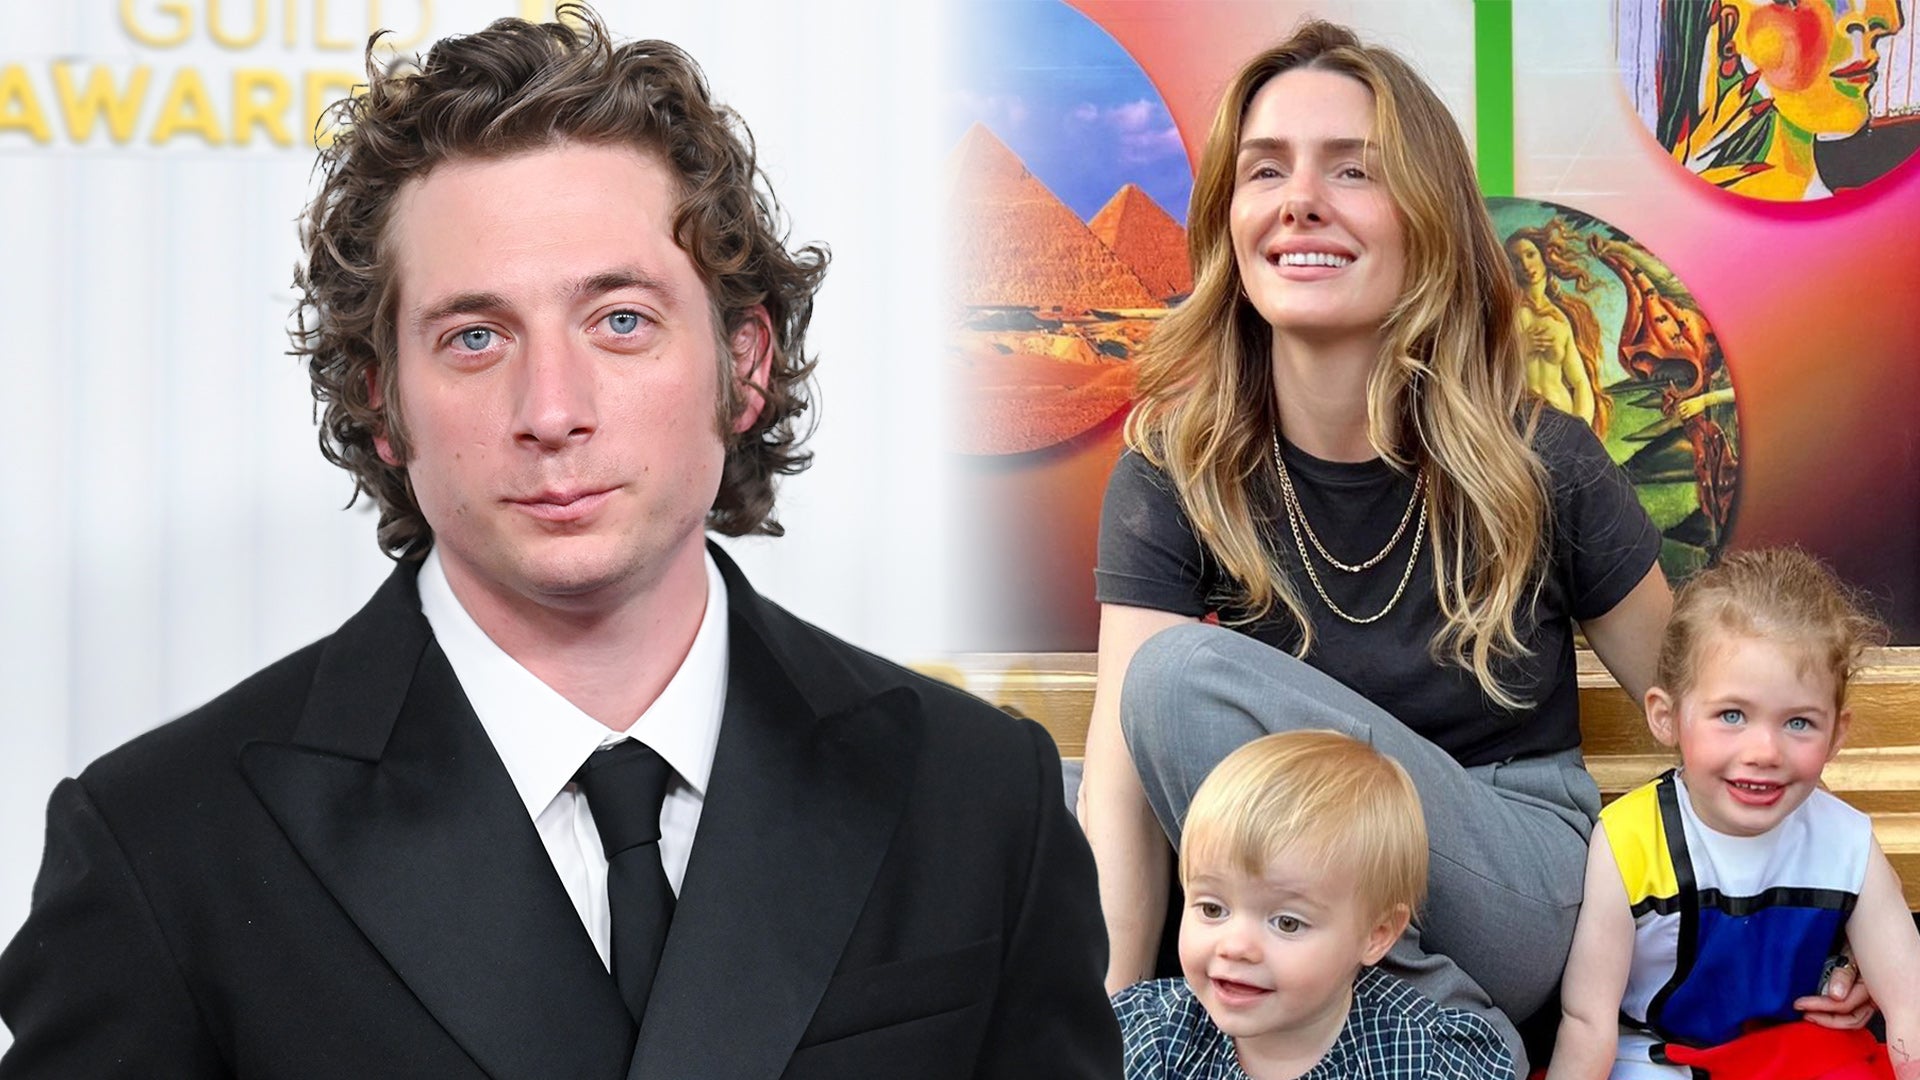 Jeremy Allen Whites Estranged Wife Addison Timlin Opens Up About Being a Single Mom Amid Divorce Entertainment Tonight image